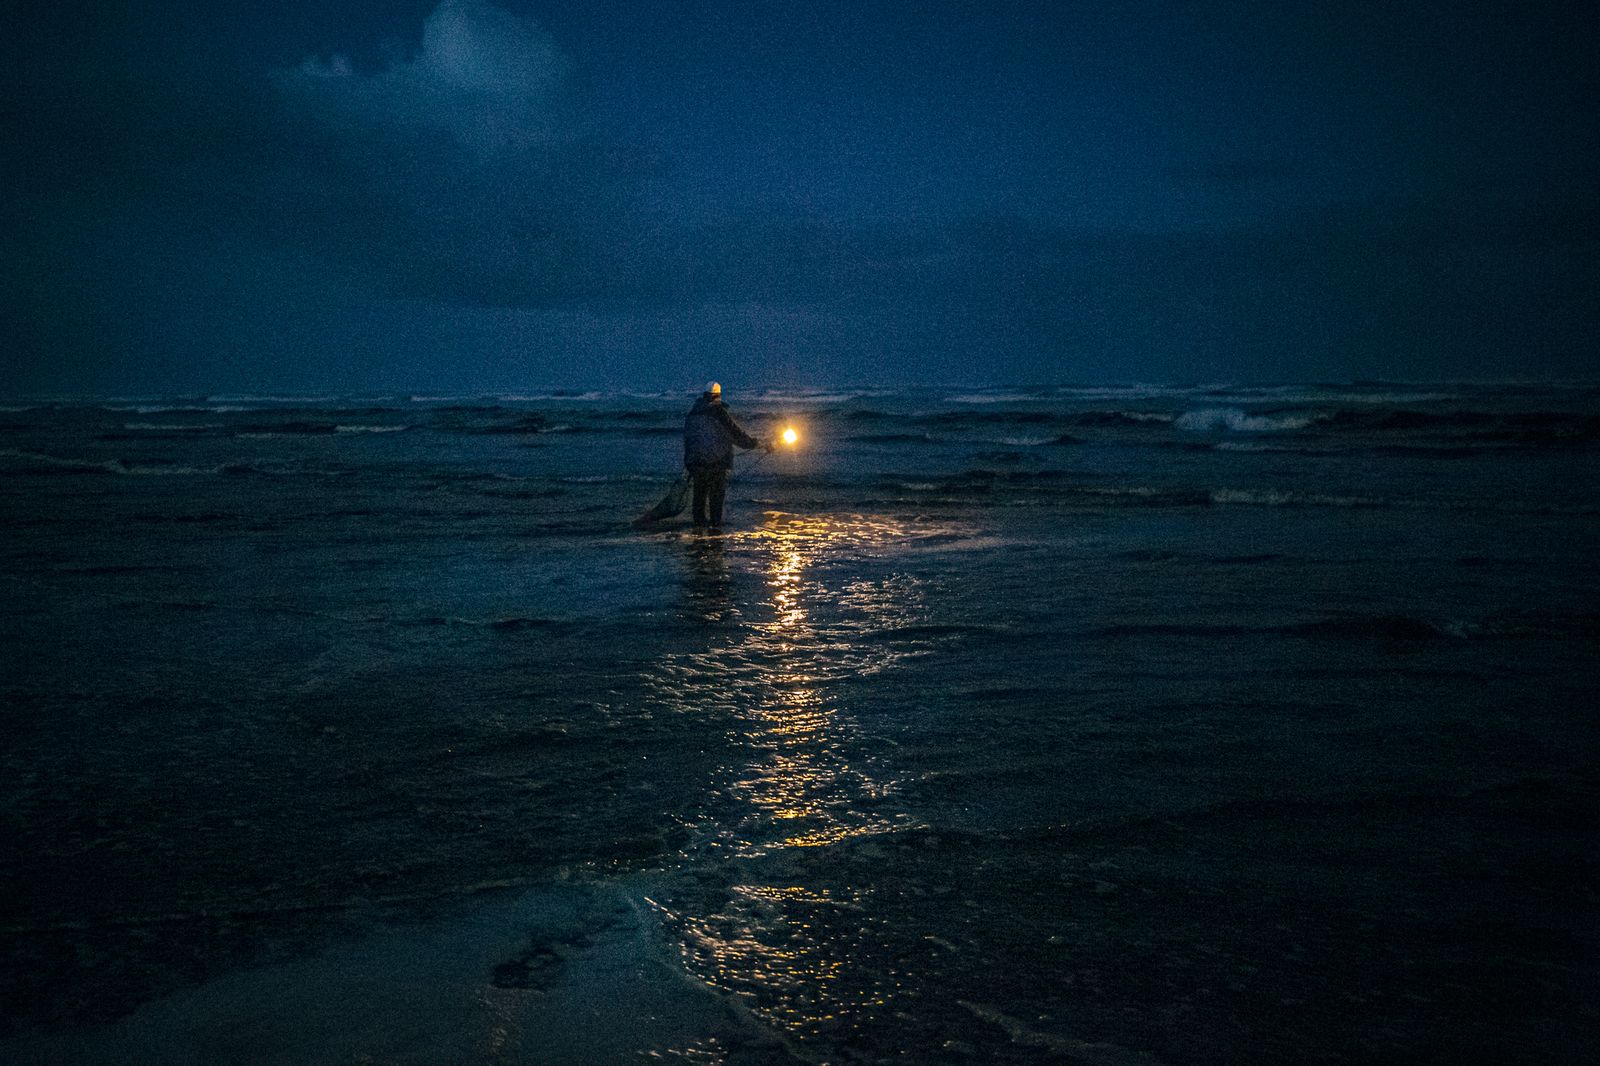 © Michael Snyder - A Quinault Indian leader looks out into the Pacific Ocean before sunrise.